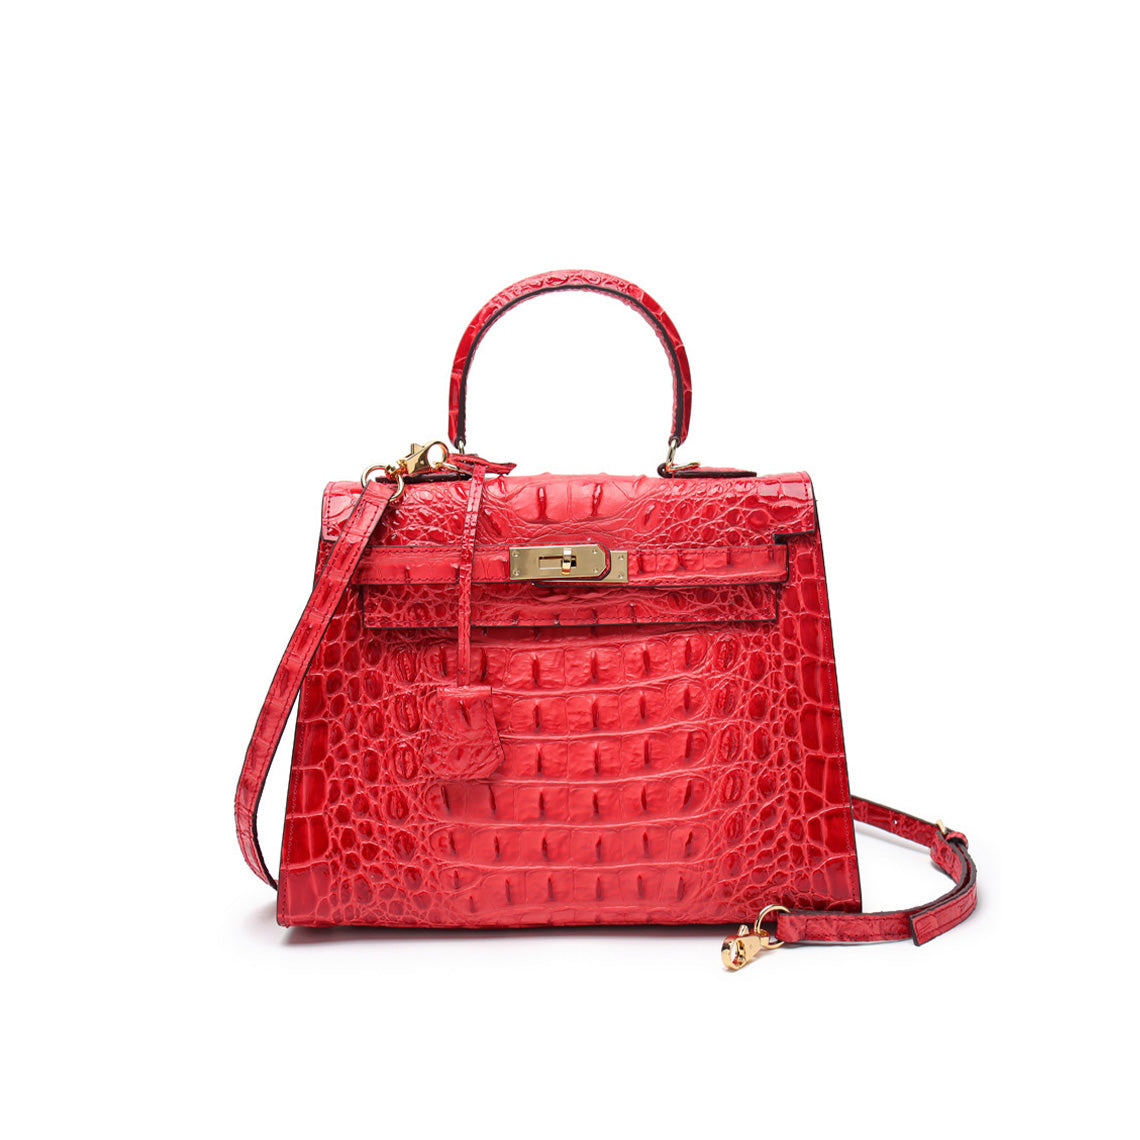 Red Inspired Kelly Bag | Style Leather Handbag